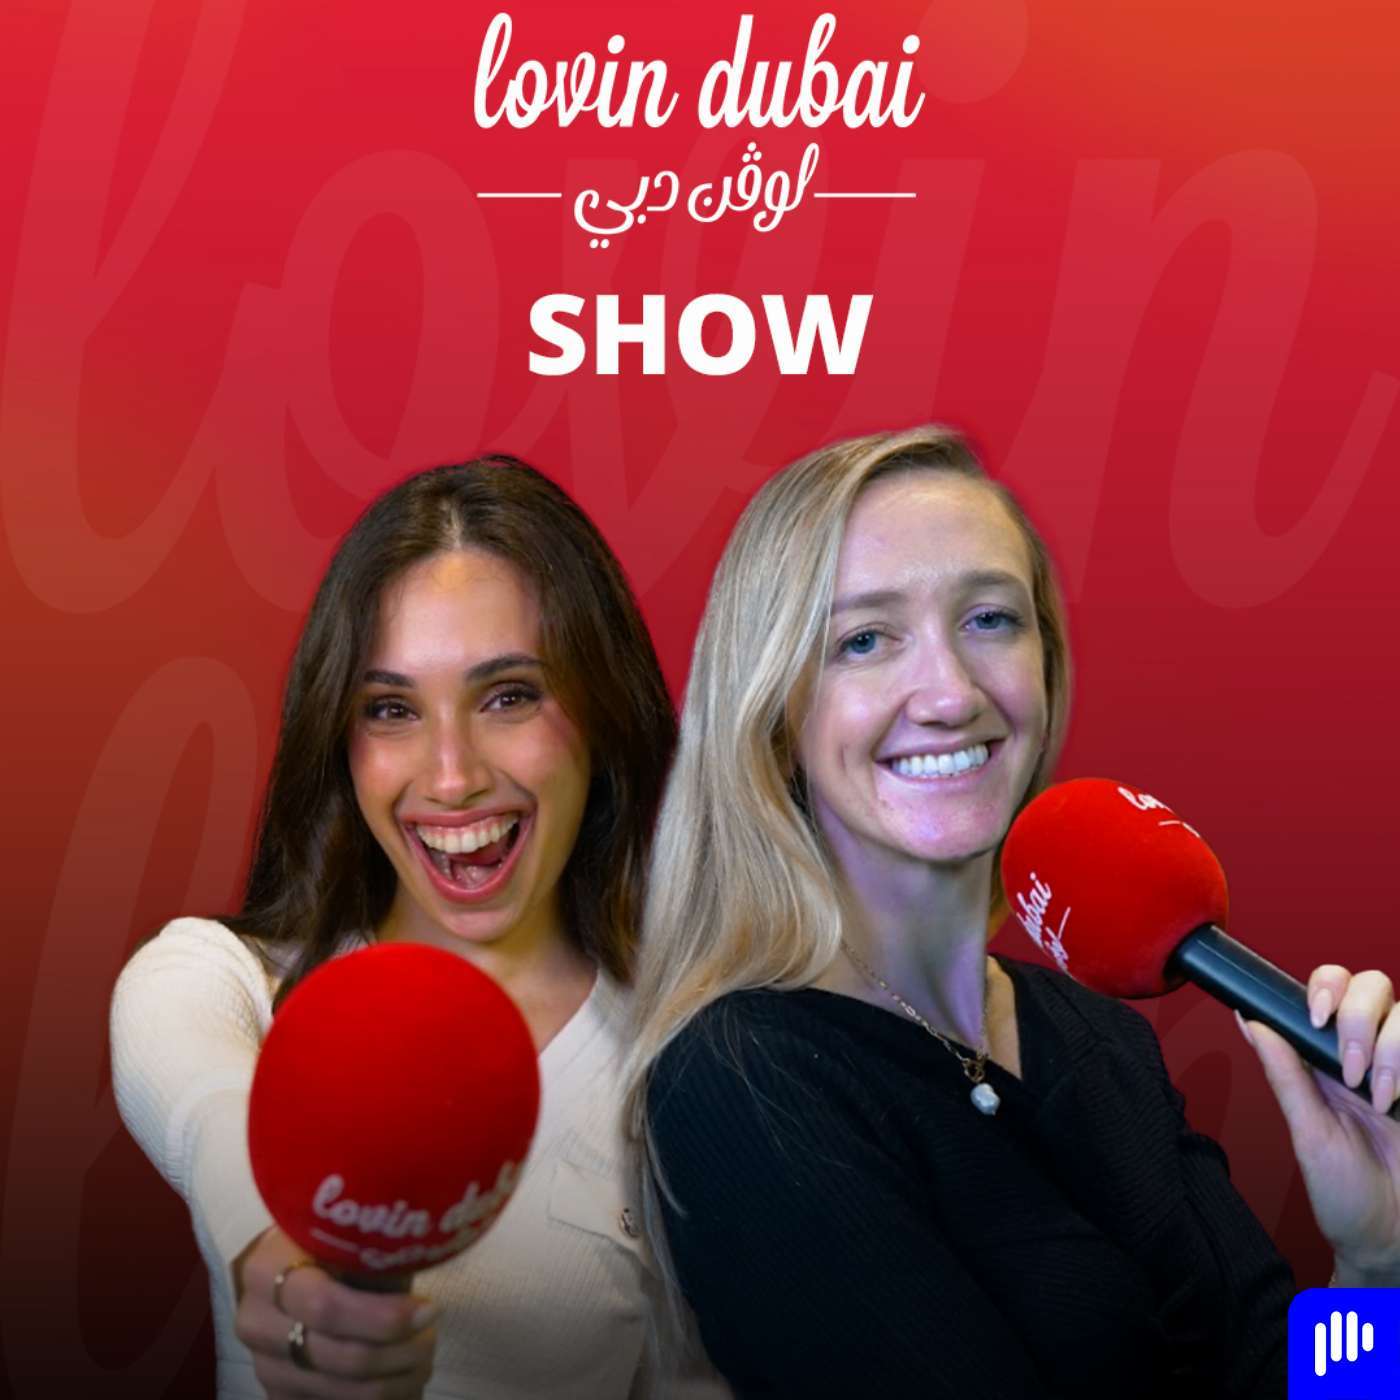 Dubai's Better Life Strategy, Swimwear Price criticism, Abdu Rozik's Response, Bad Friends Are Coming To Abu Dhabi , & Psoriasis Insights